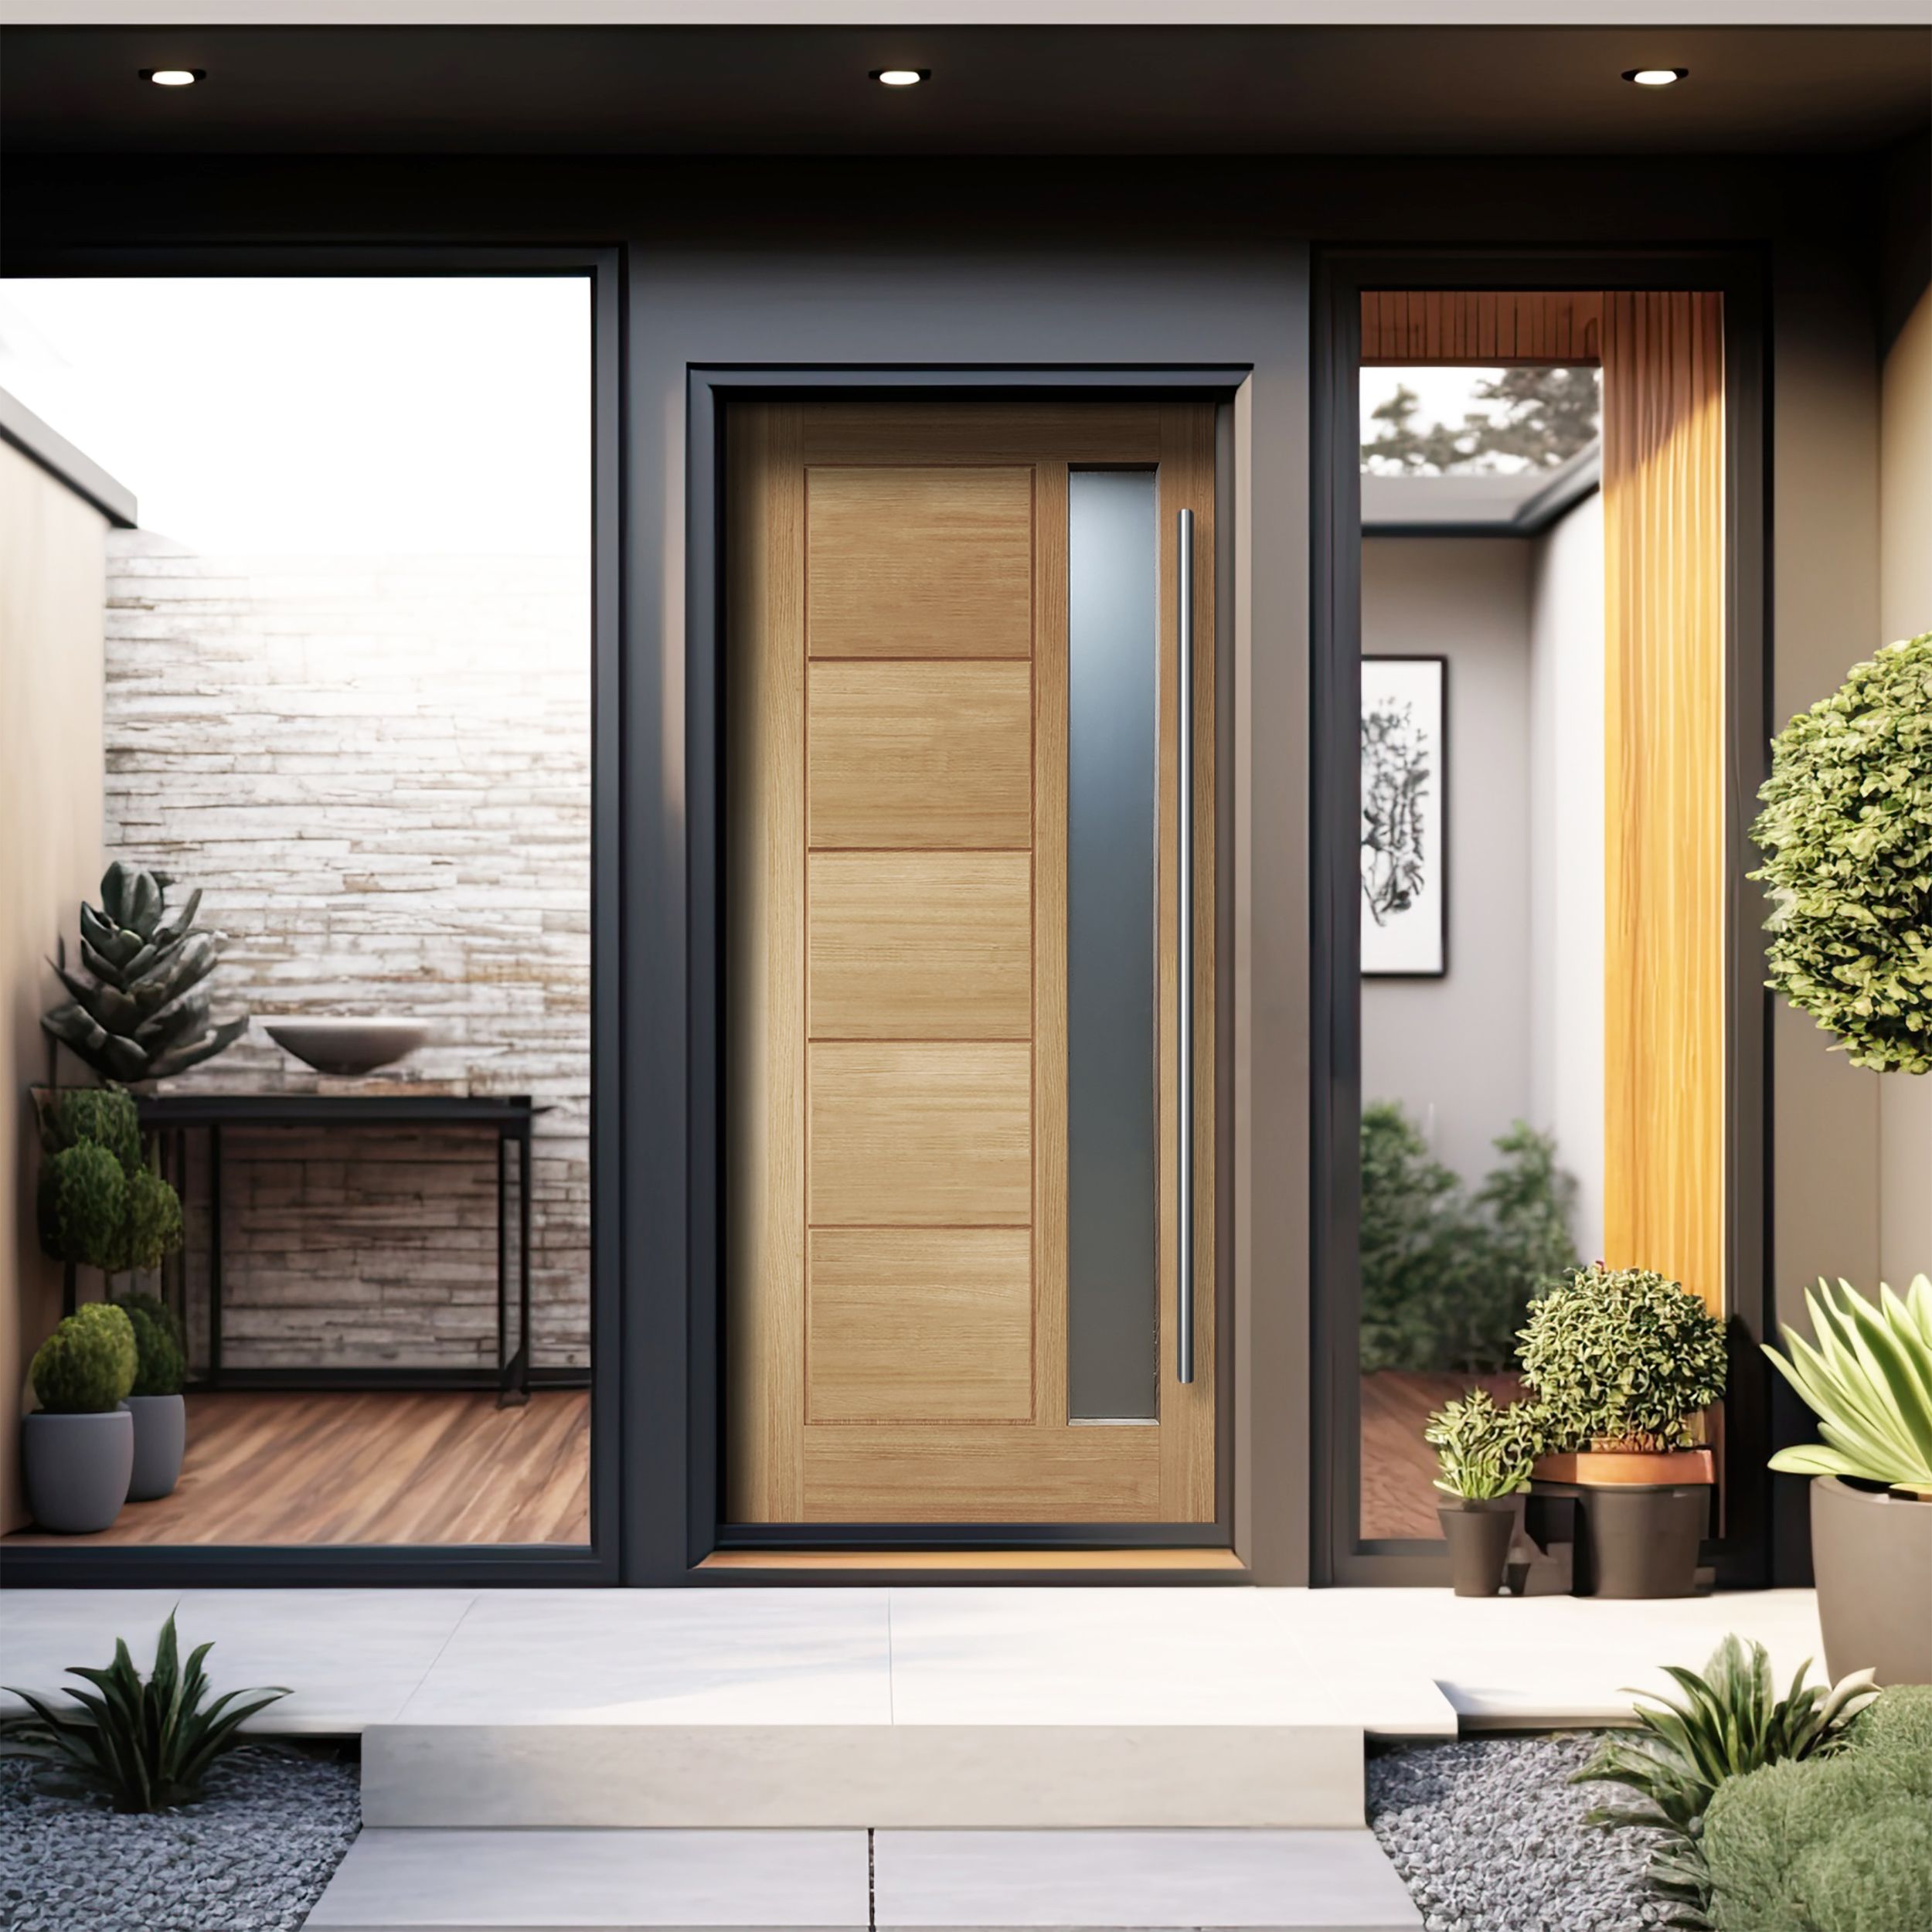 Linear 5 panel Frosted glass Obscure Timber White oak veneer Swinging External Front Door, (H)1981mm (W)762mm